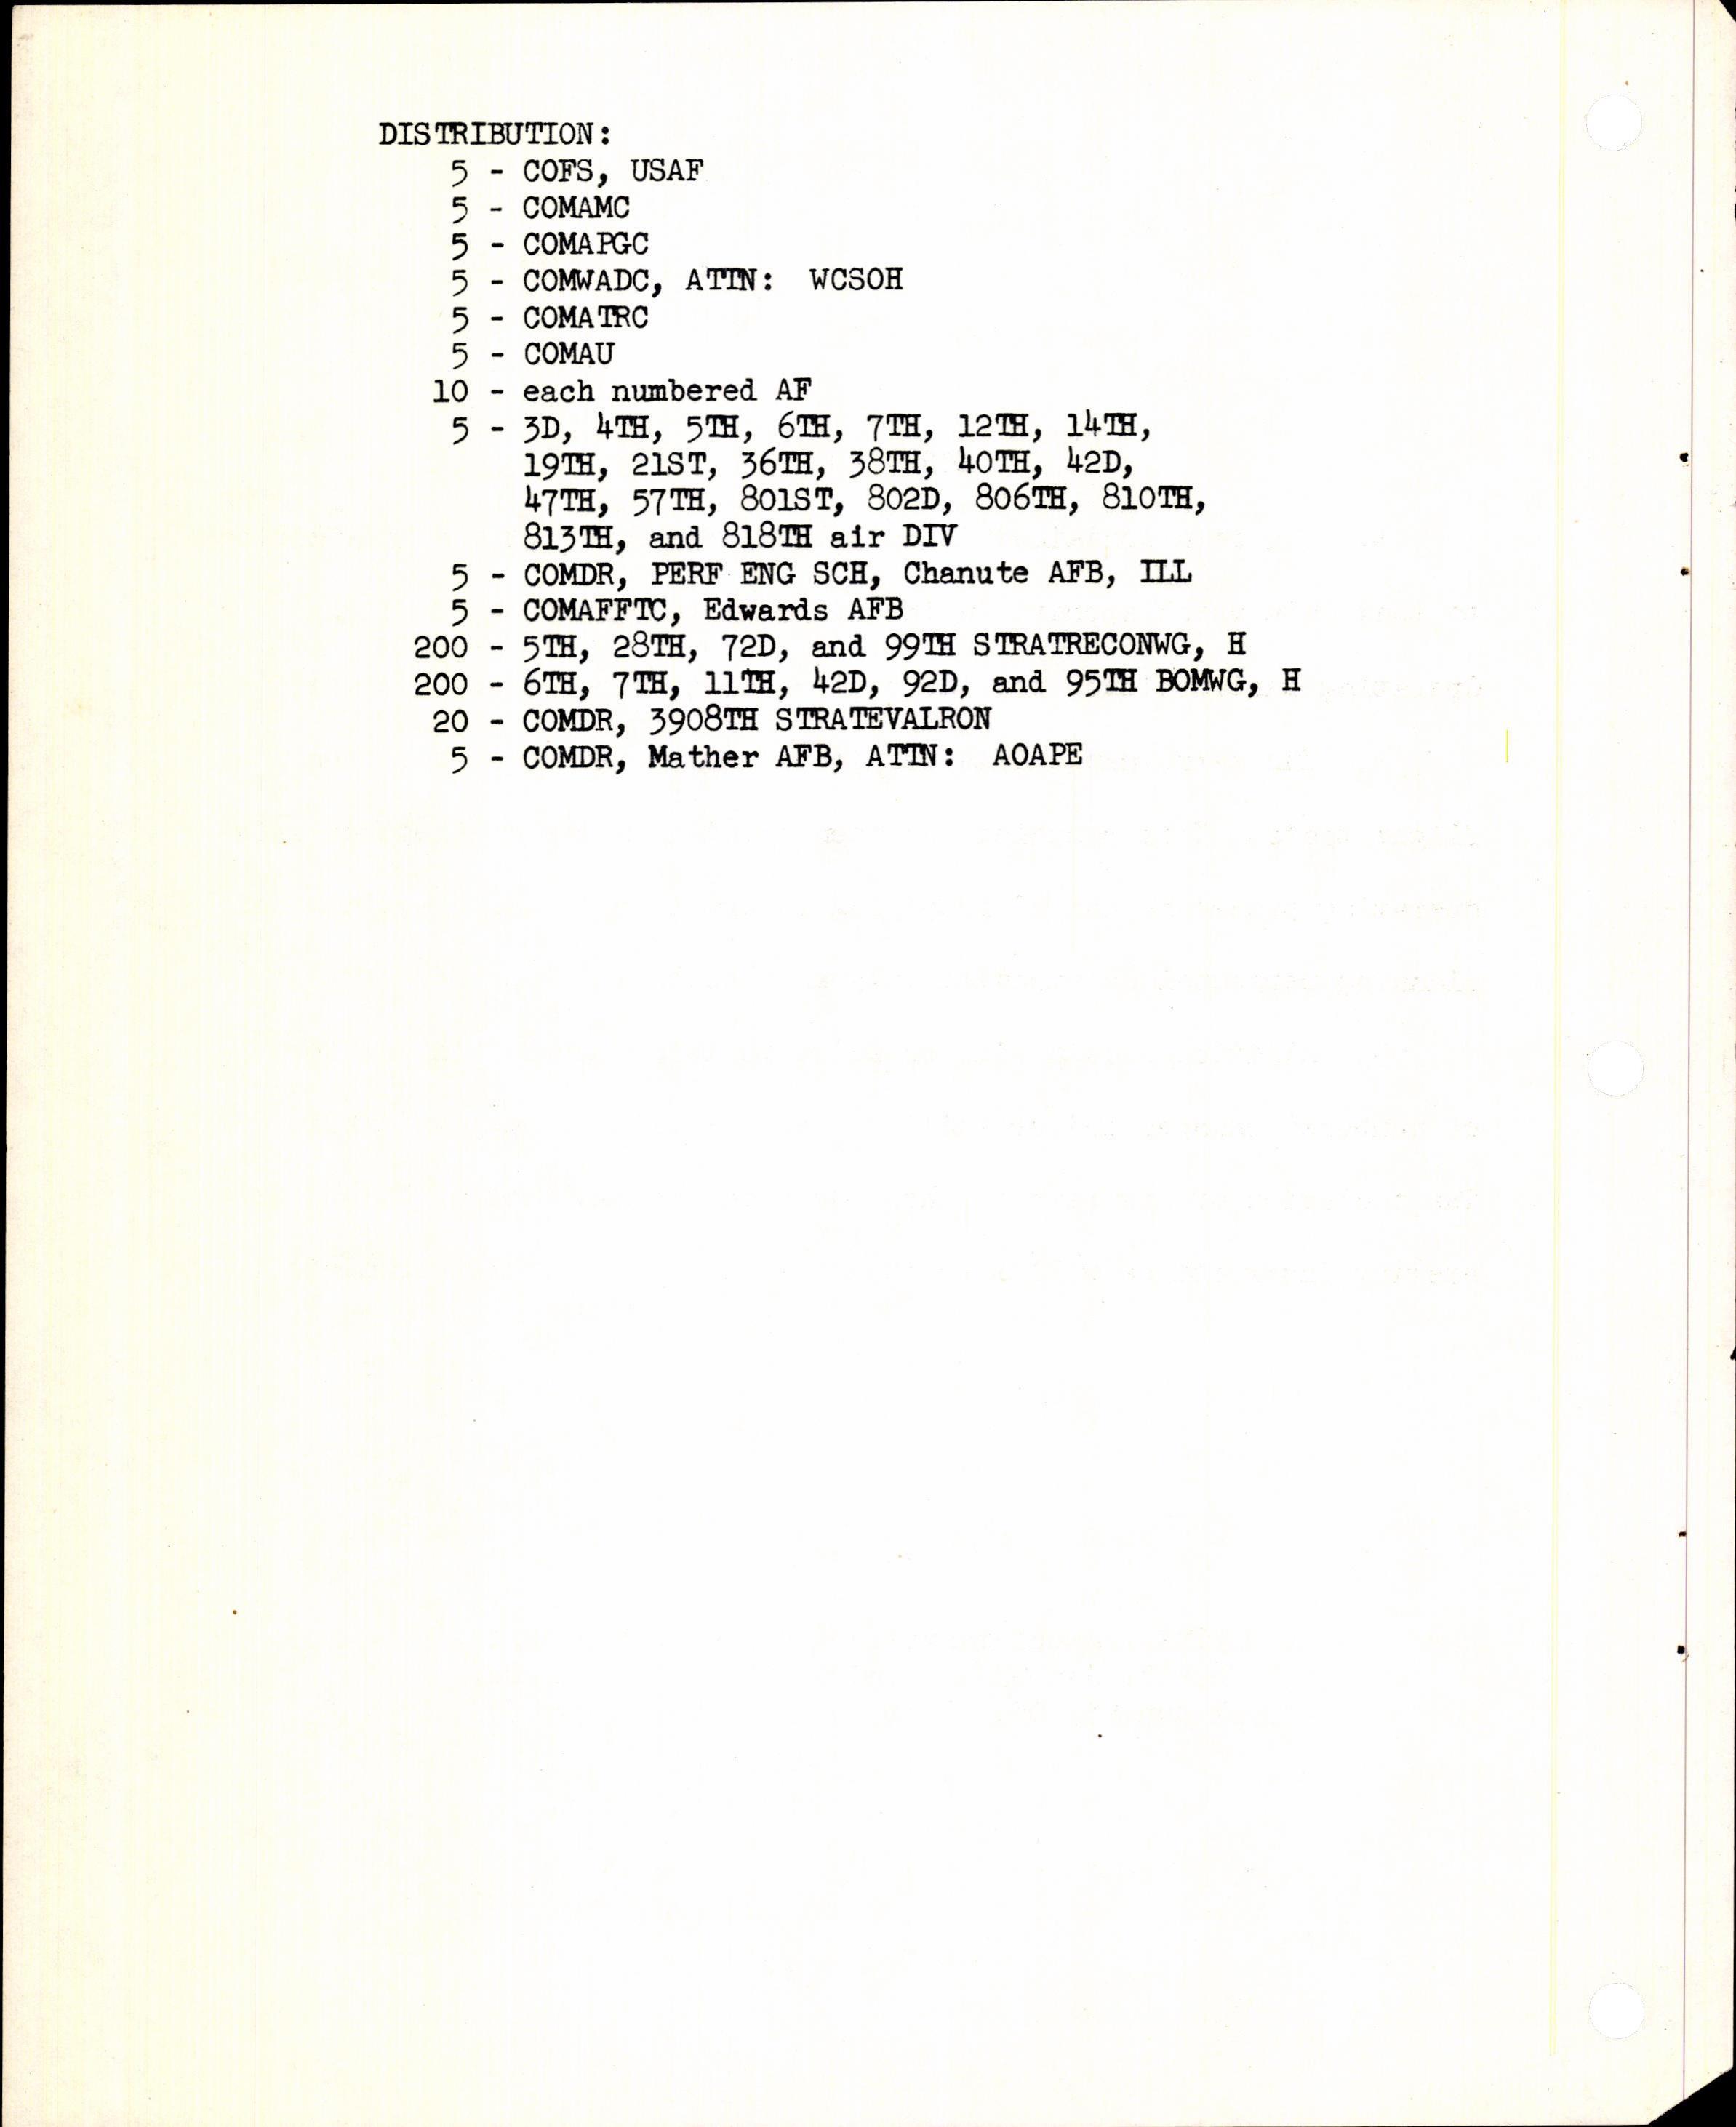 Sample page 6 from AirCorps Library document: Supplementary Performance Data for B-36 Type Aircraft